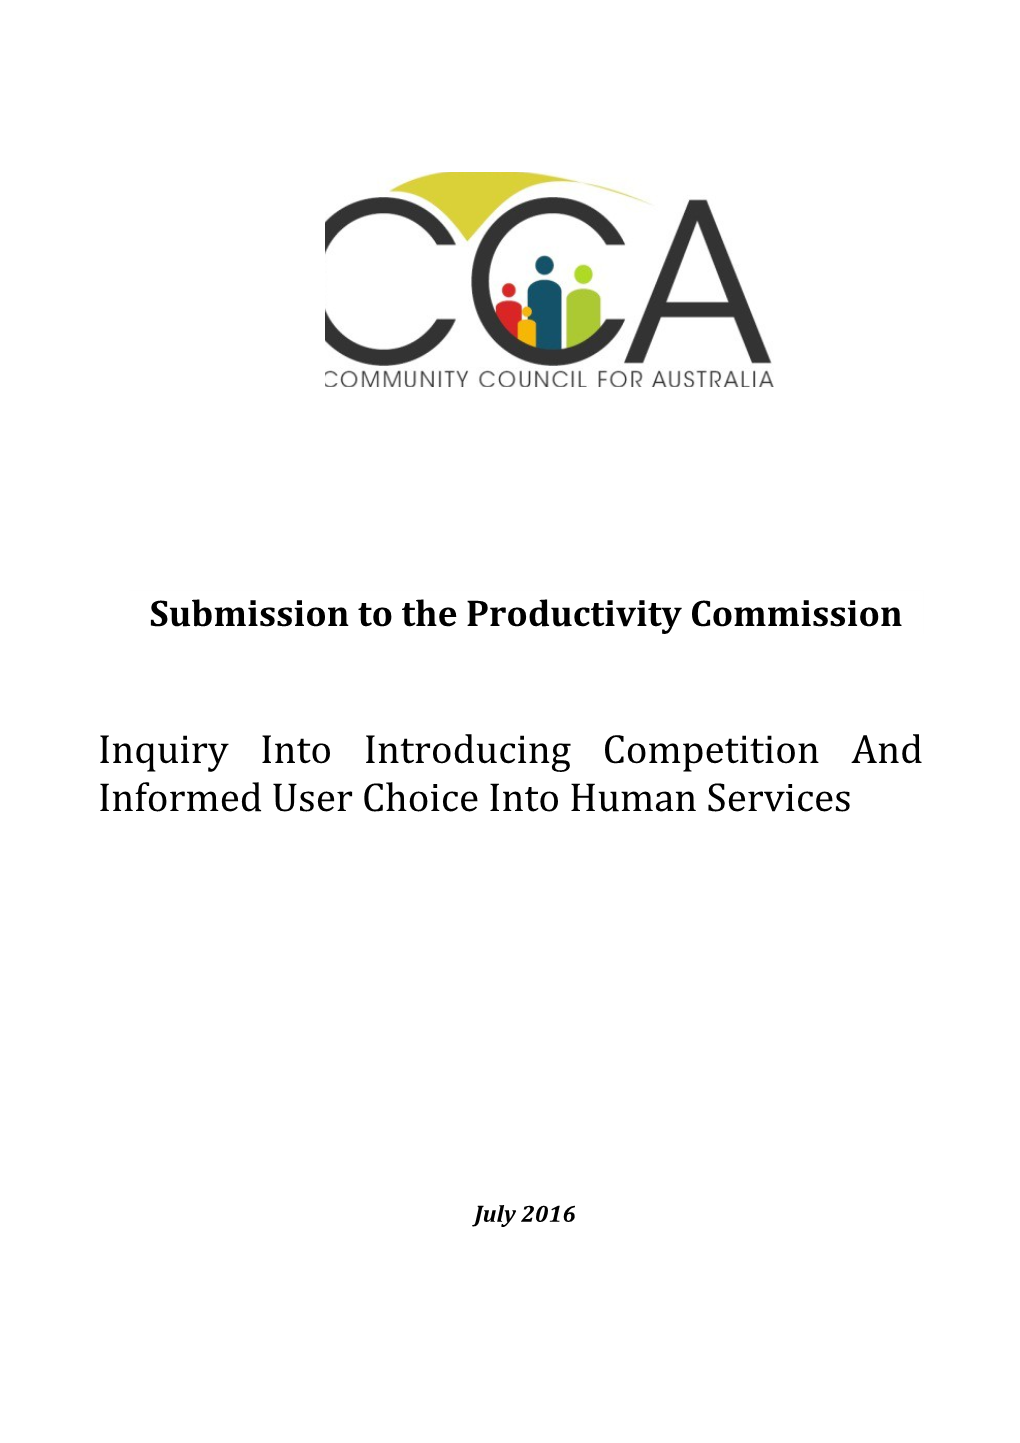 Submission 193 - Community Council for Australia (CCA) - Identifying Sectors for Reform